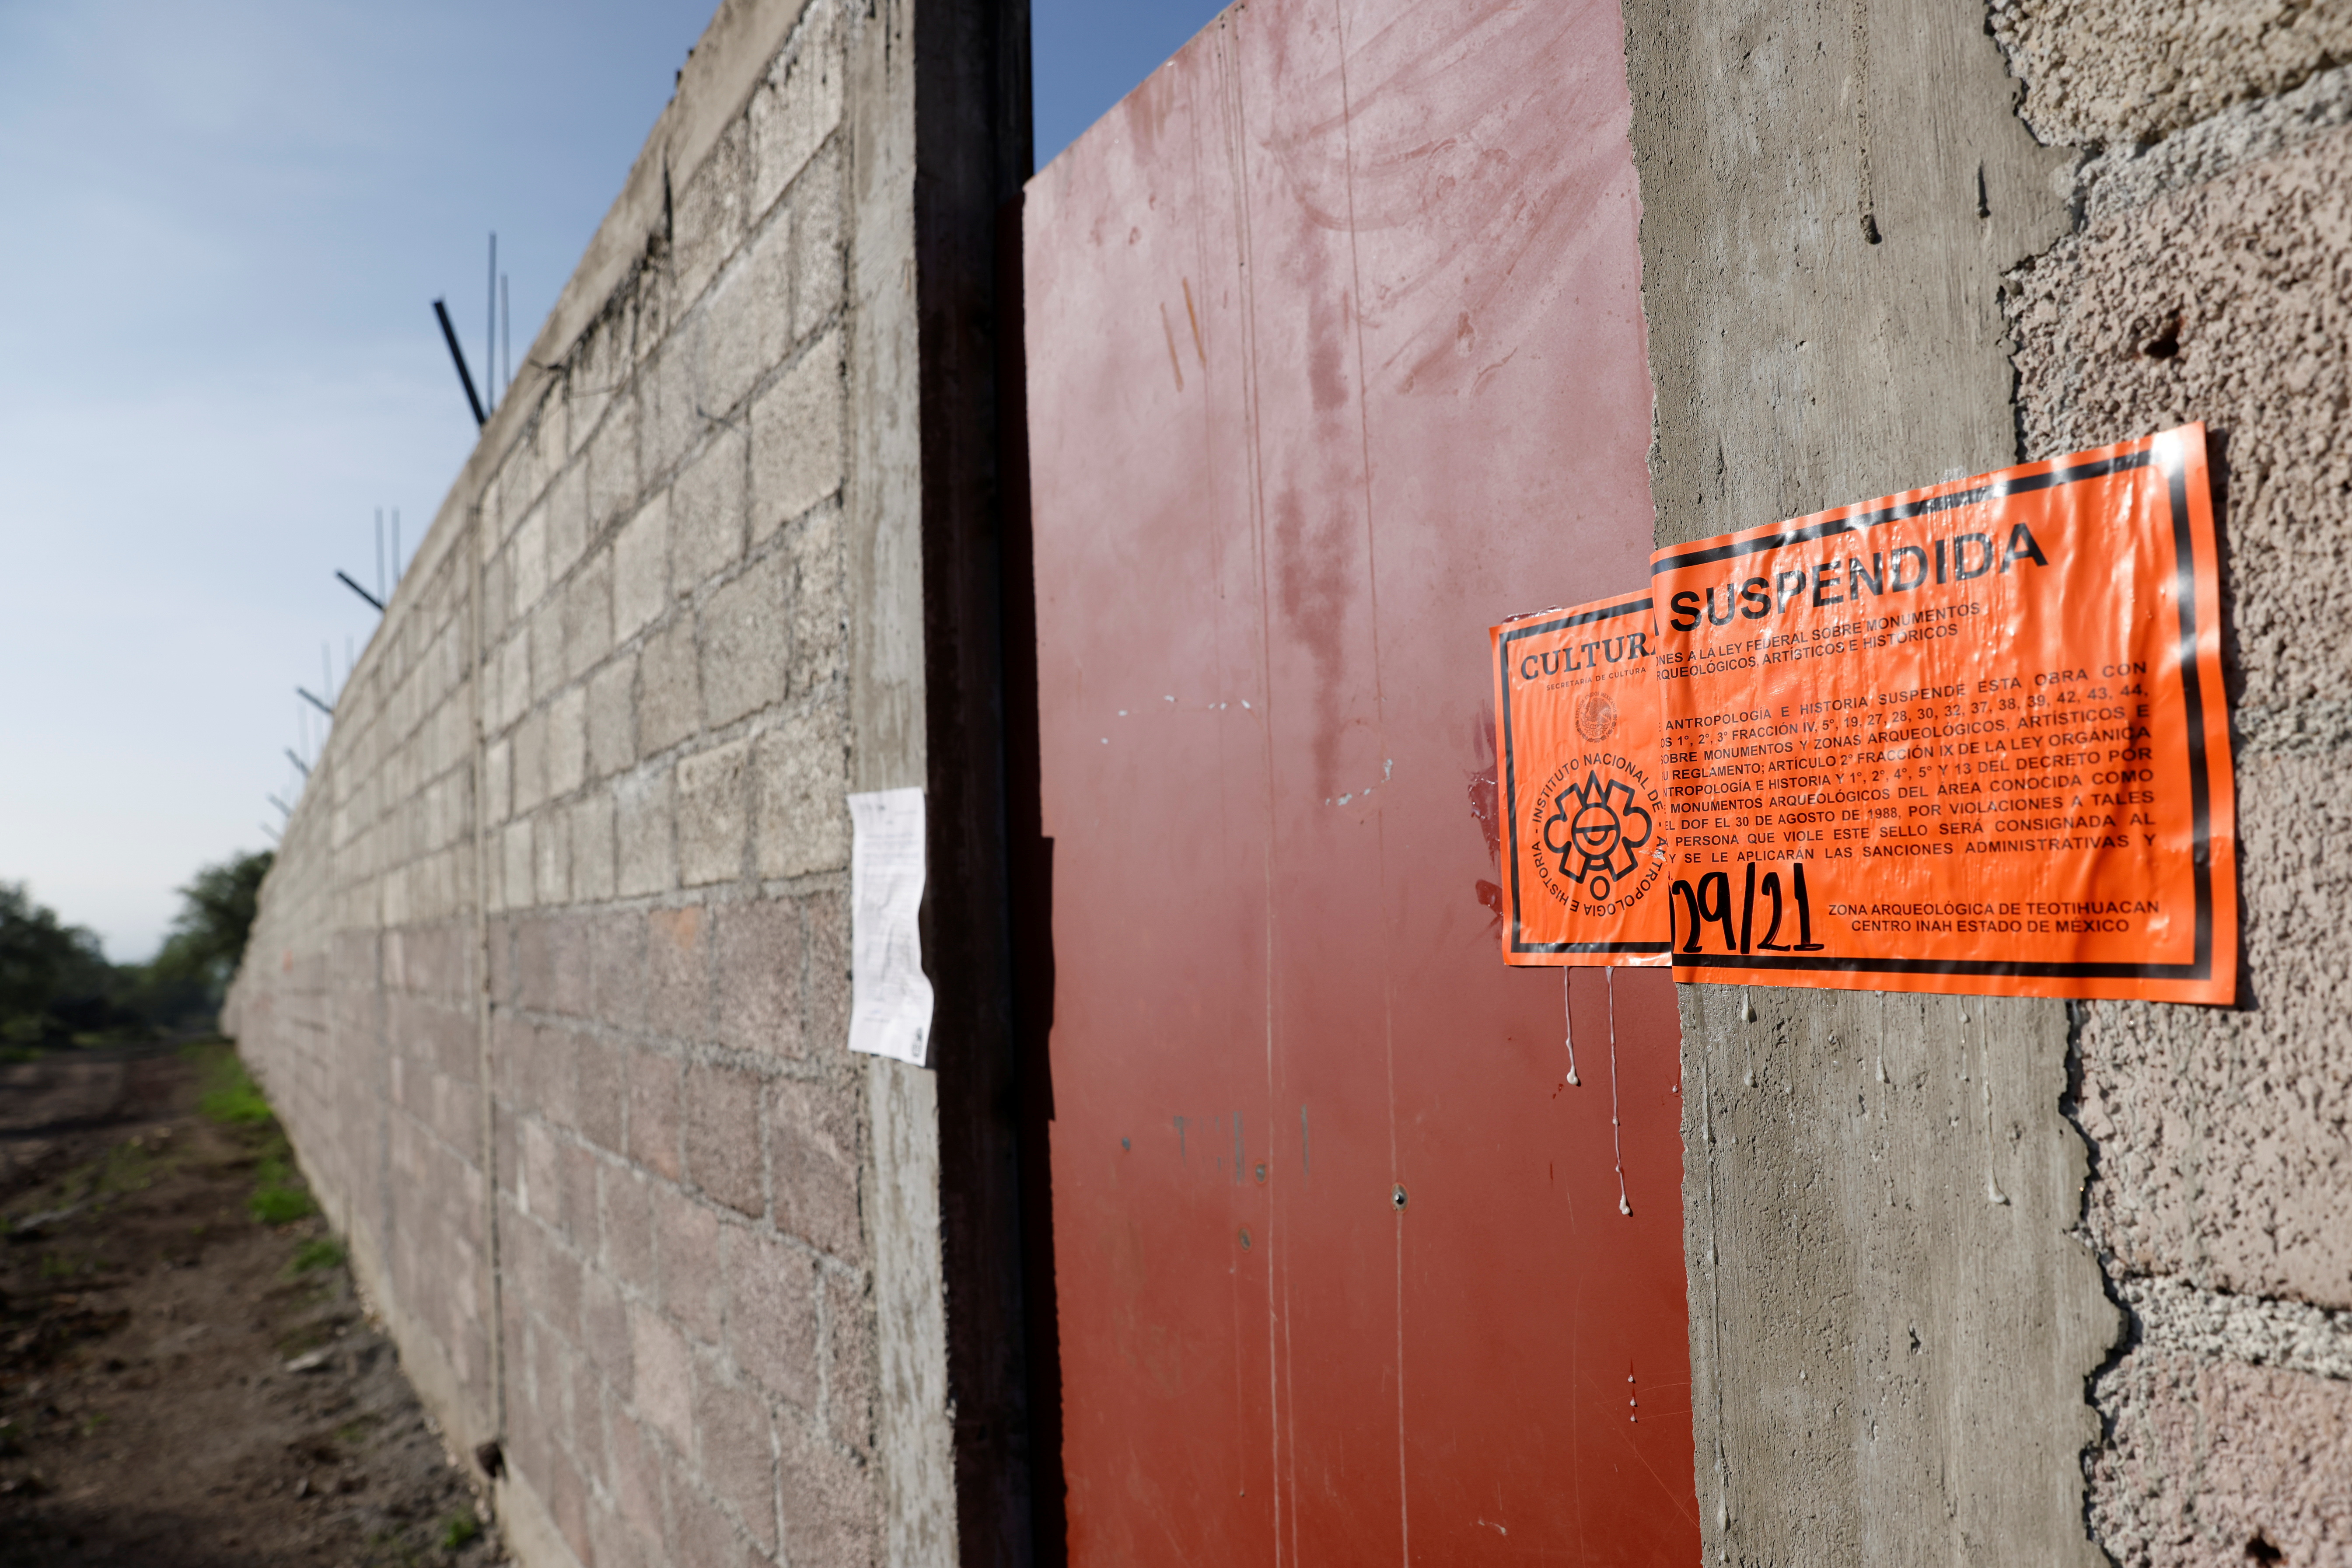 A stamp indicating the suspension of illegal construction is seen on the wall near the pre-Hispanic ruins of Teotihuacan in Oztoyahualco